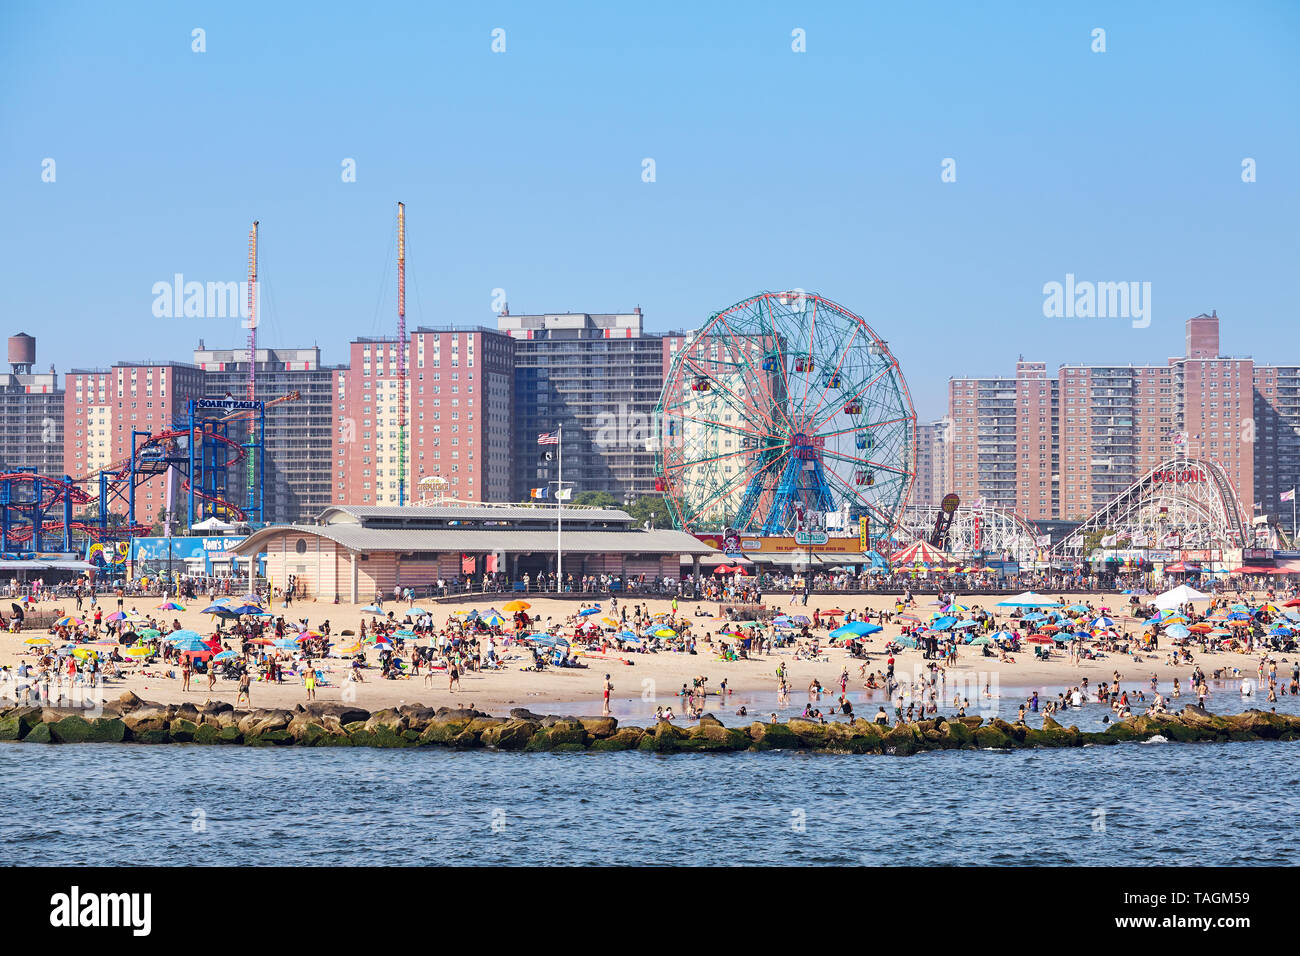 New York, USA - July 02, 2018: Crowded Coney Island beach and amusement parks seen from the pier on a sunny day. Stock Photo